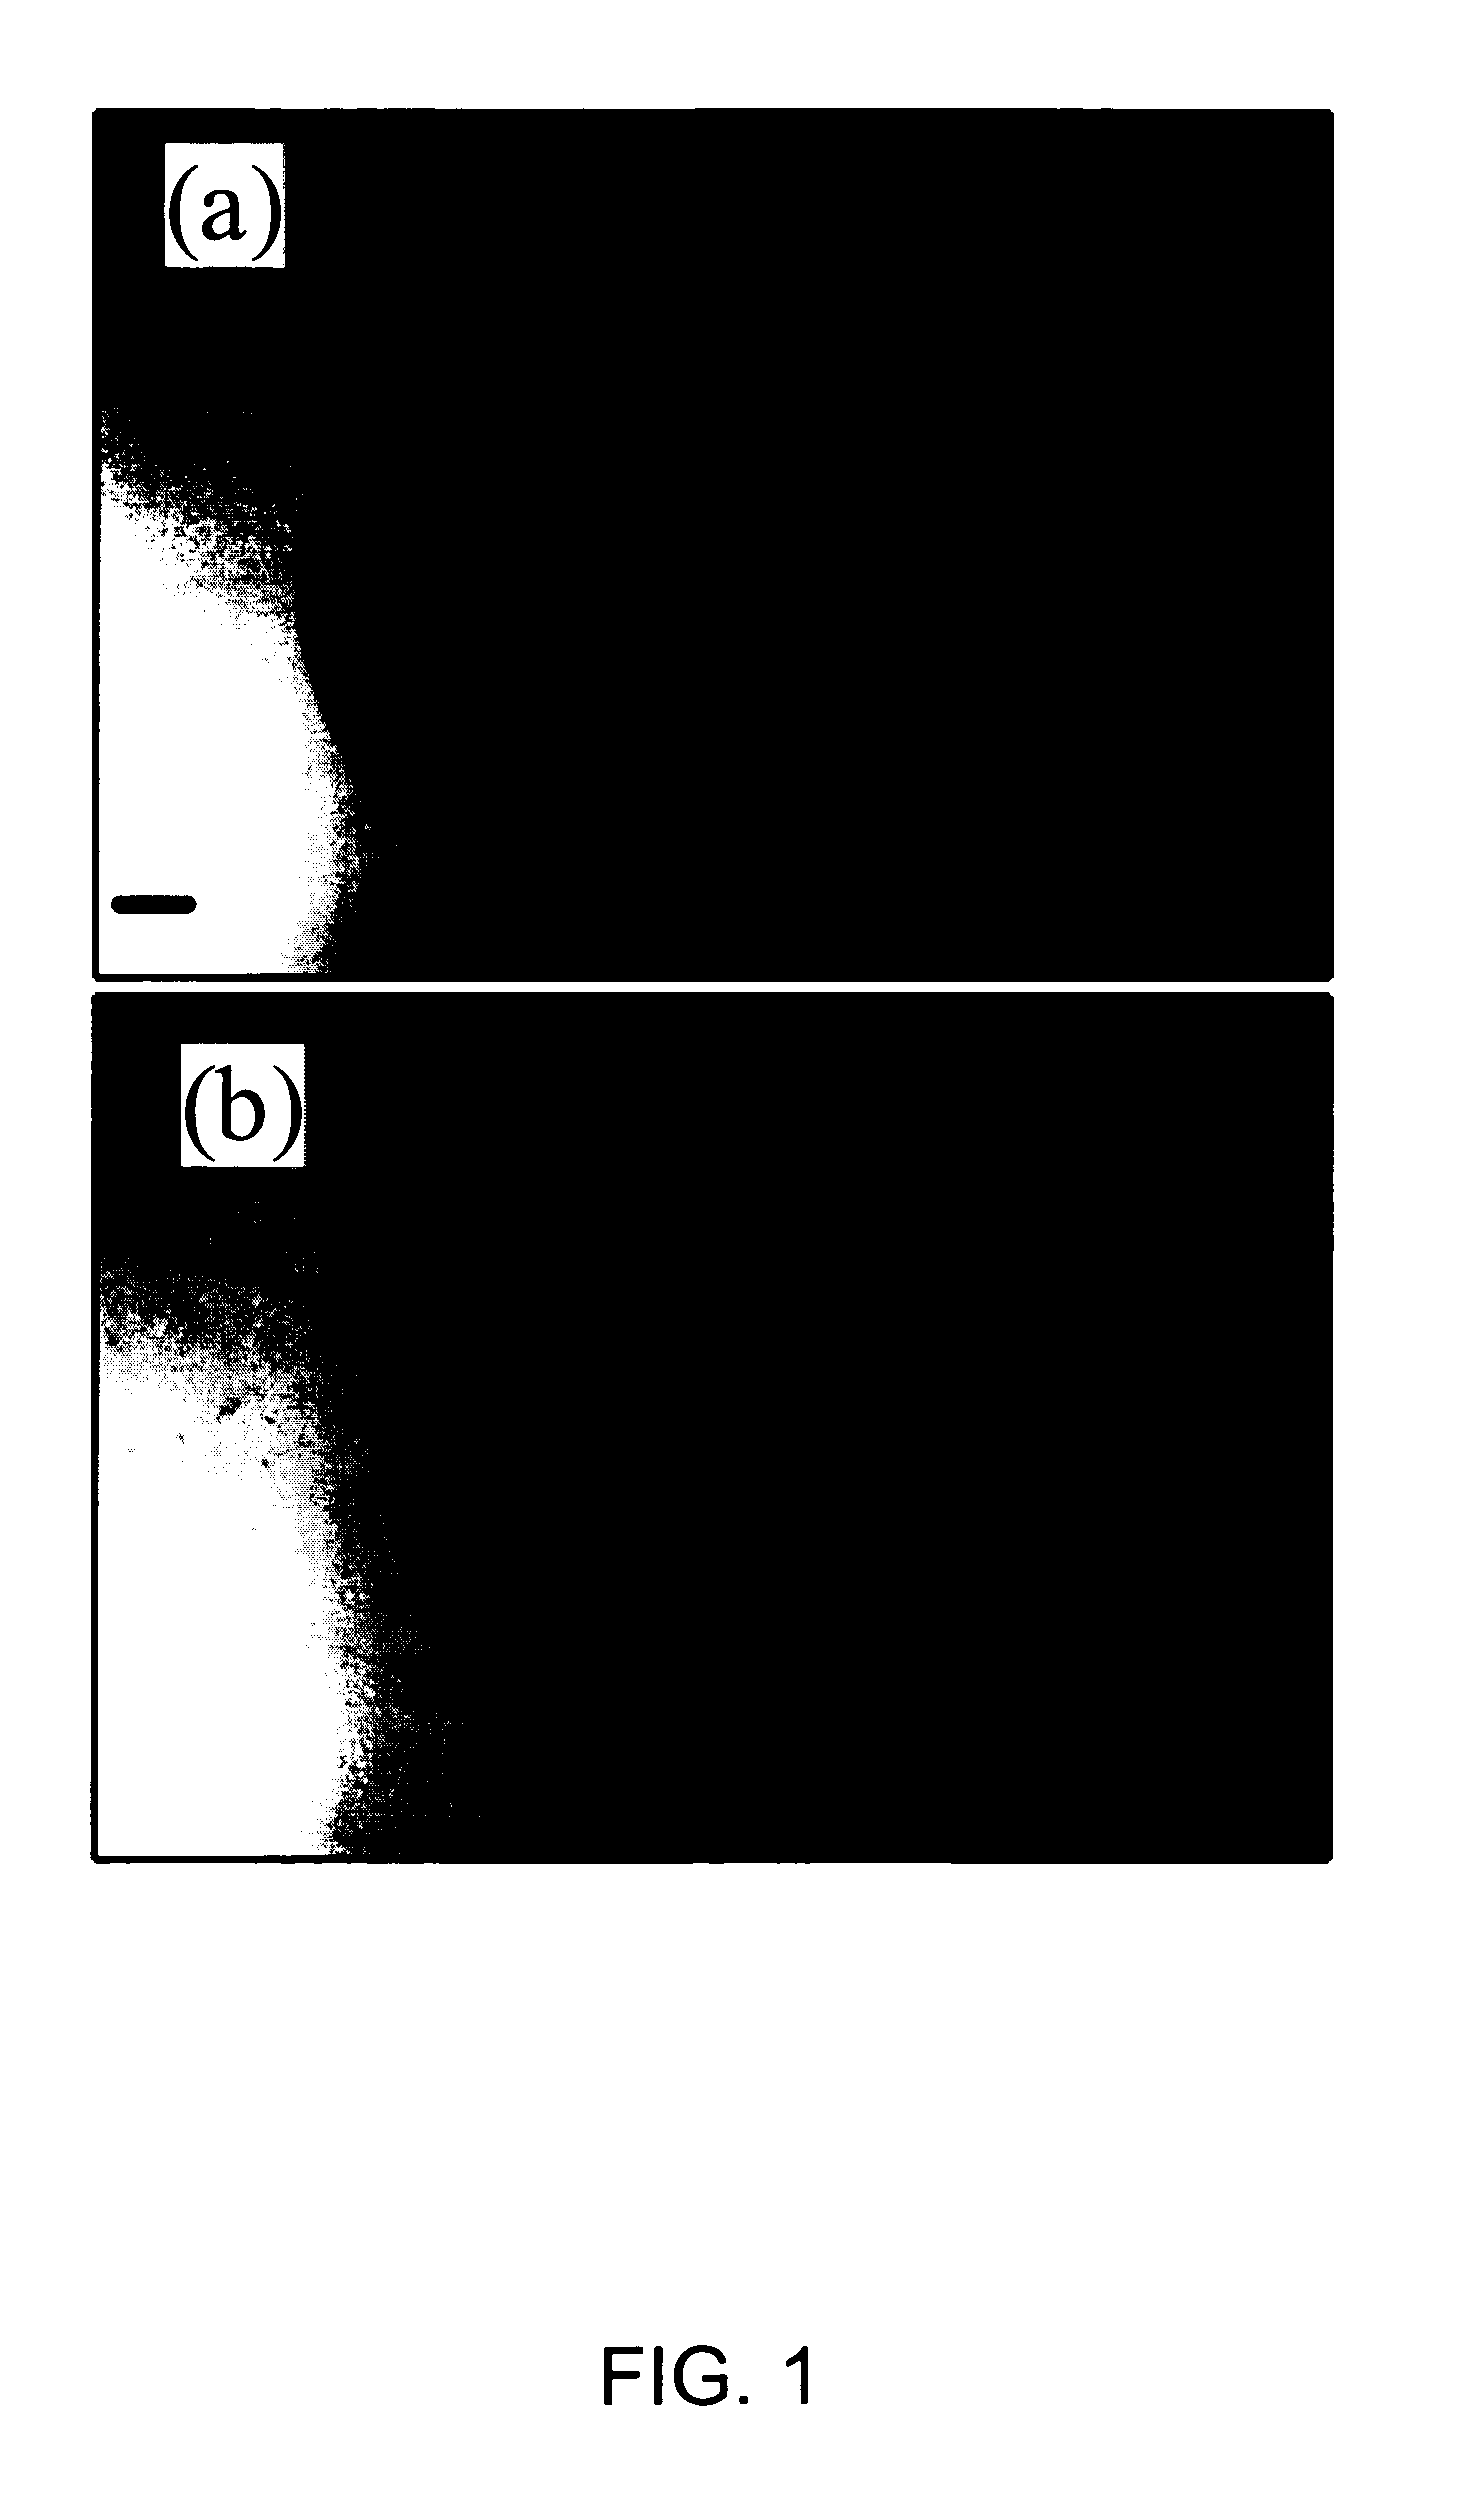 Process and apparatus for segregation and testing by spectral analysis of solid deposits derived from liquid mixtures